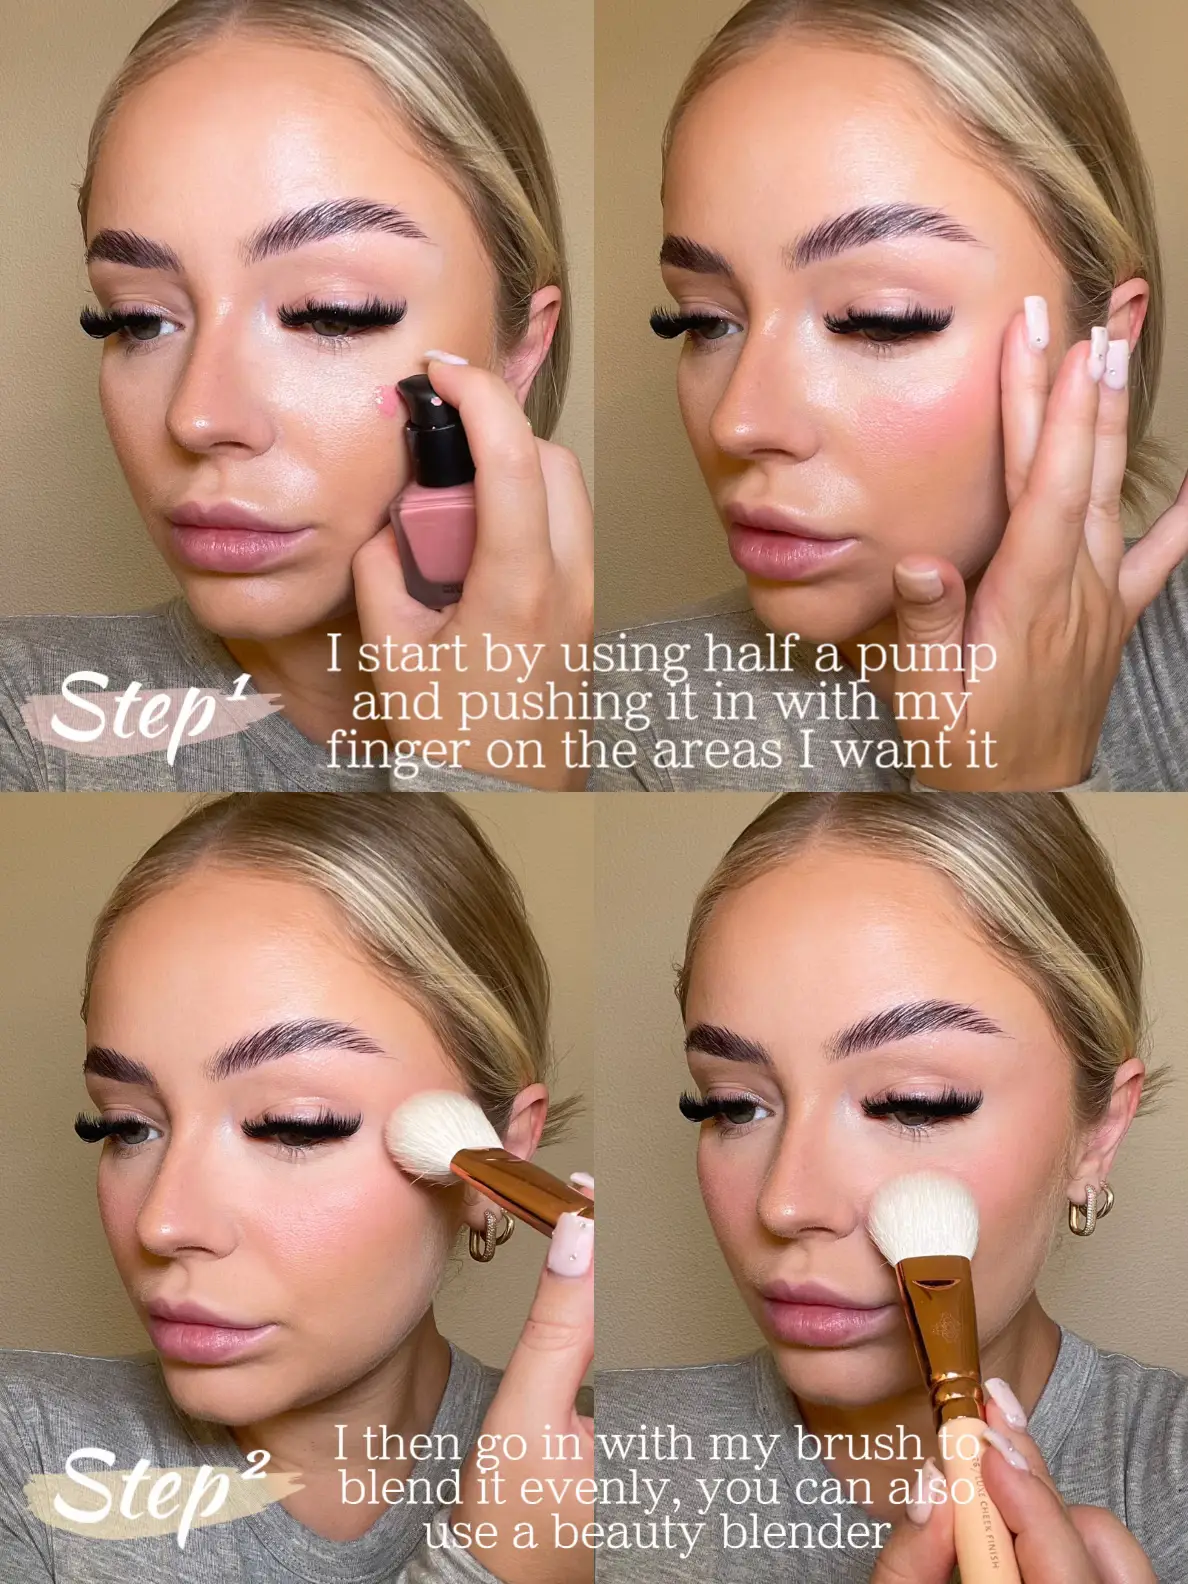 rosy & dewy makeup tutorial 🌹, Gallery posted by Britt Minetti